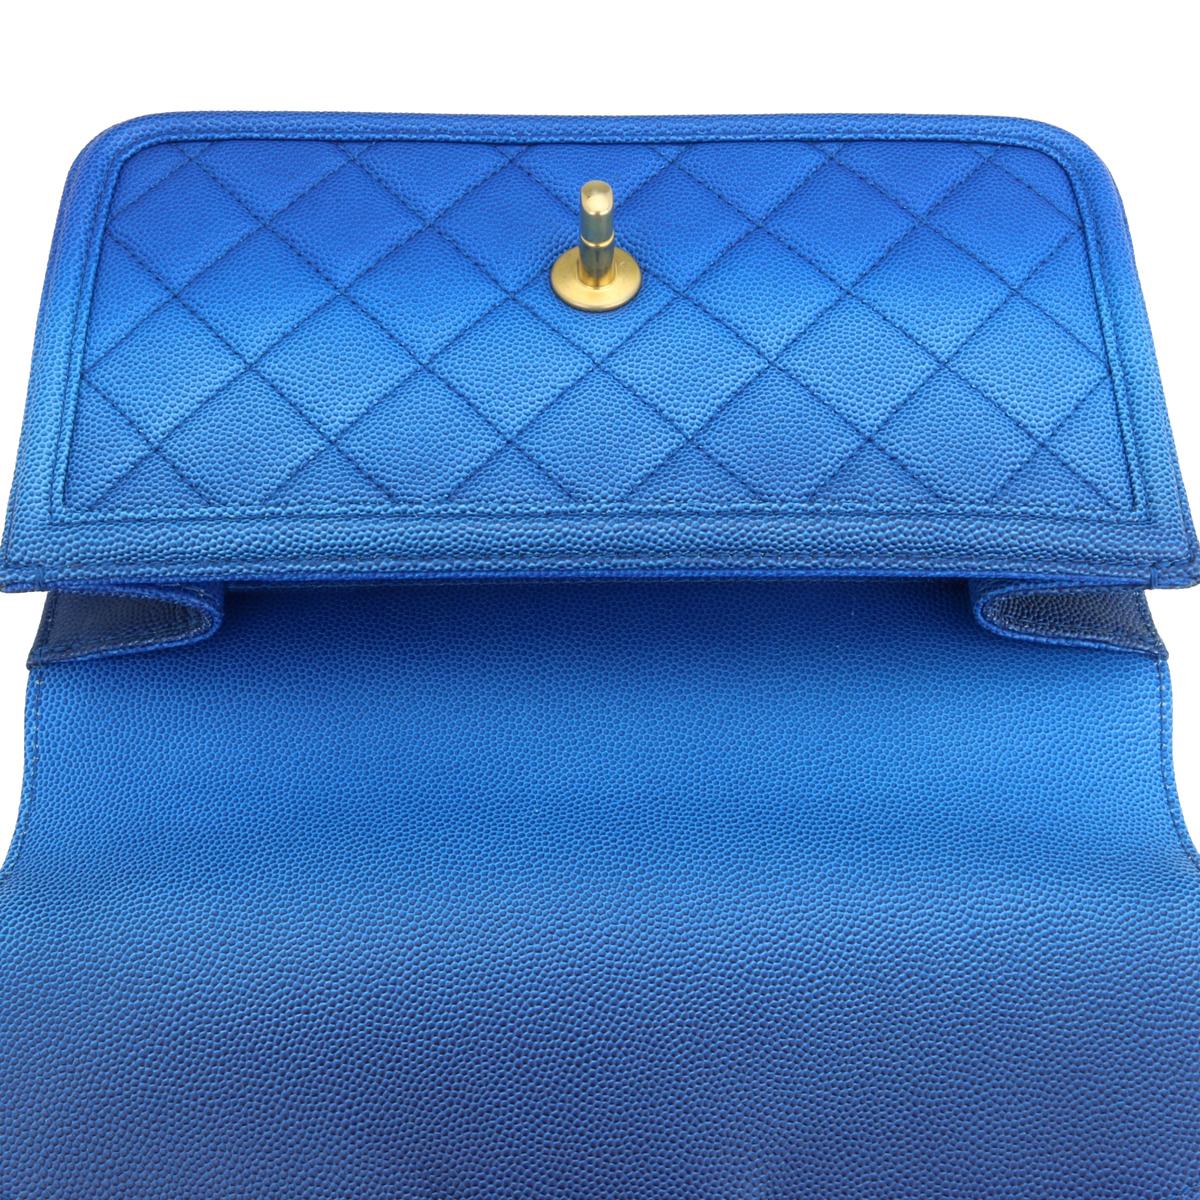 CHANEL Sunset On The Sea Flap Bag Blue Caviar with Brushed Gold Hardware 2019 For Sale 10